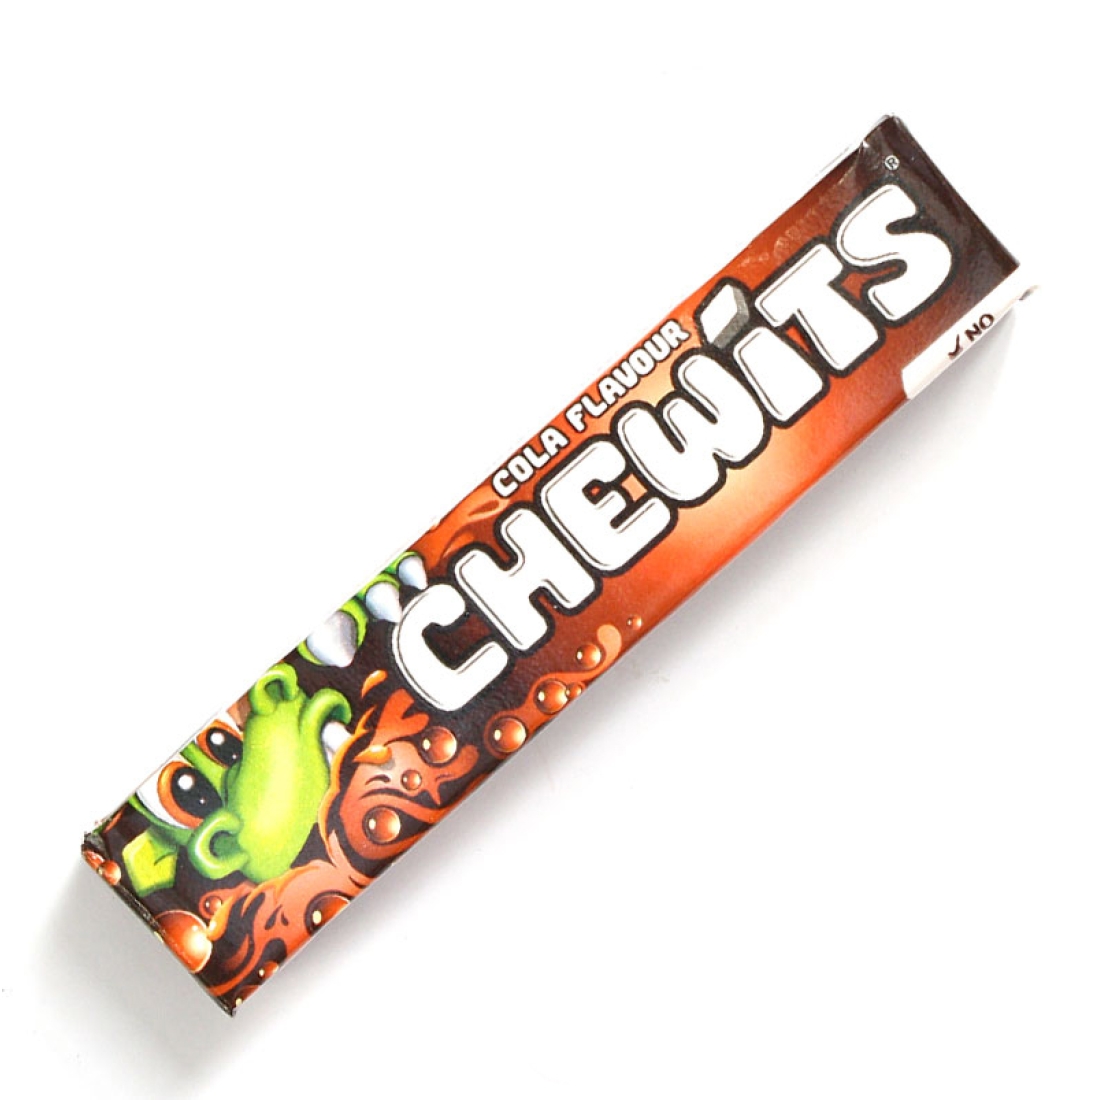 Cola Chewits - 3 Packs- Chewits Sweets From The UK Retro Sweet Shop